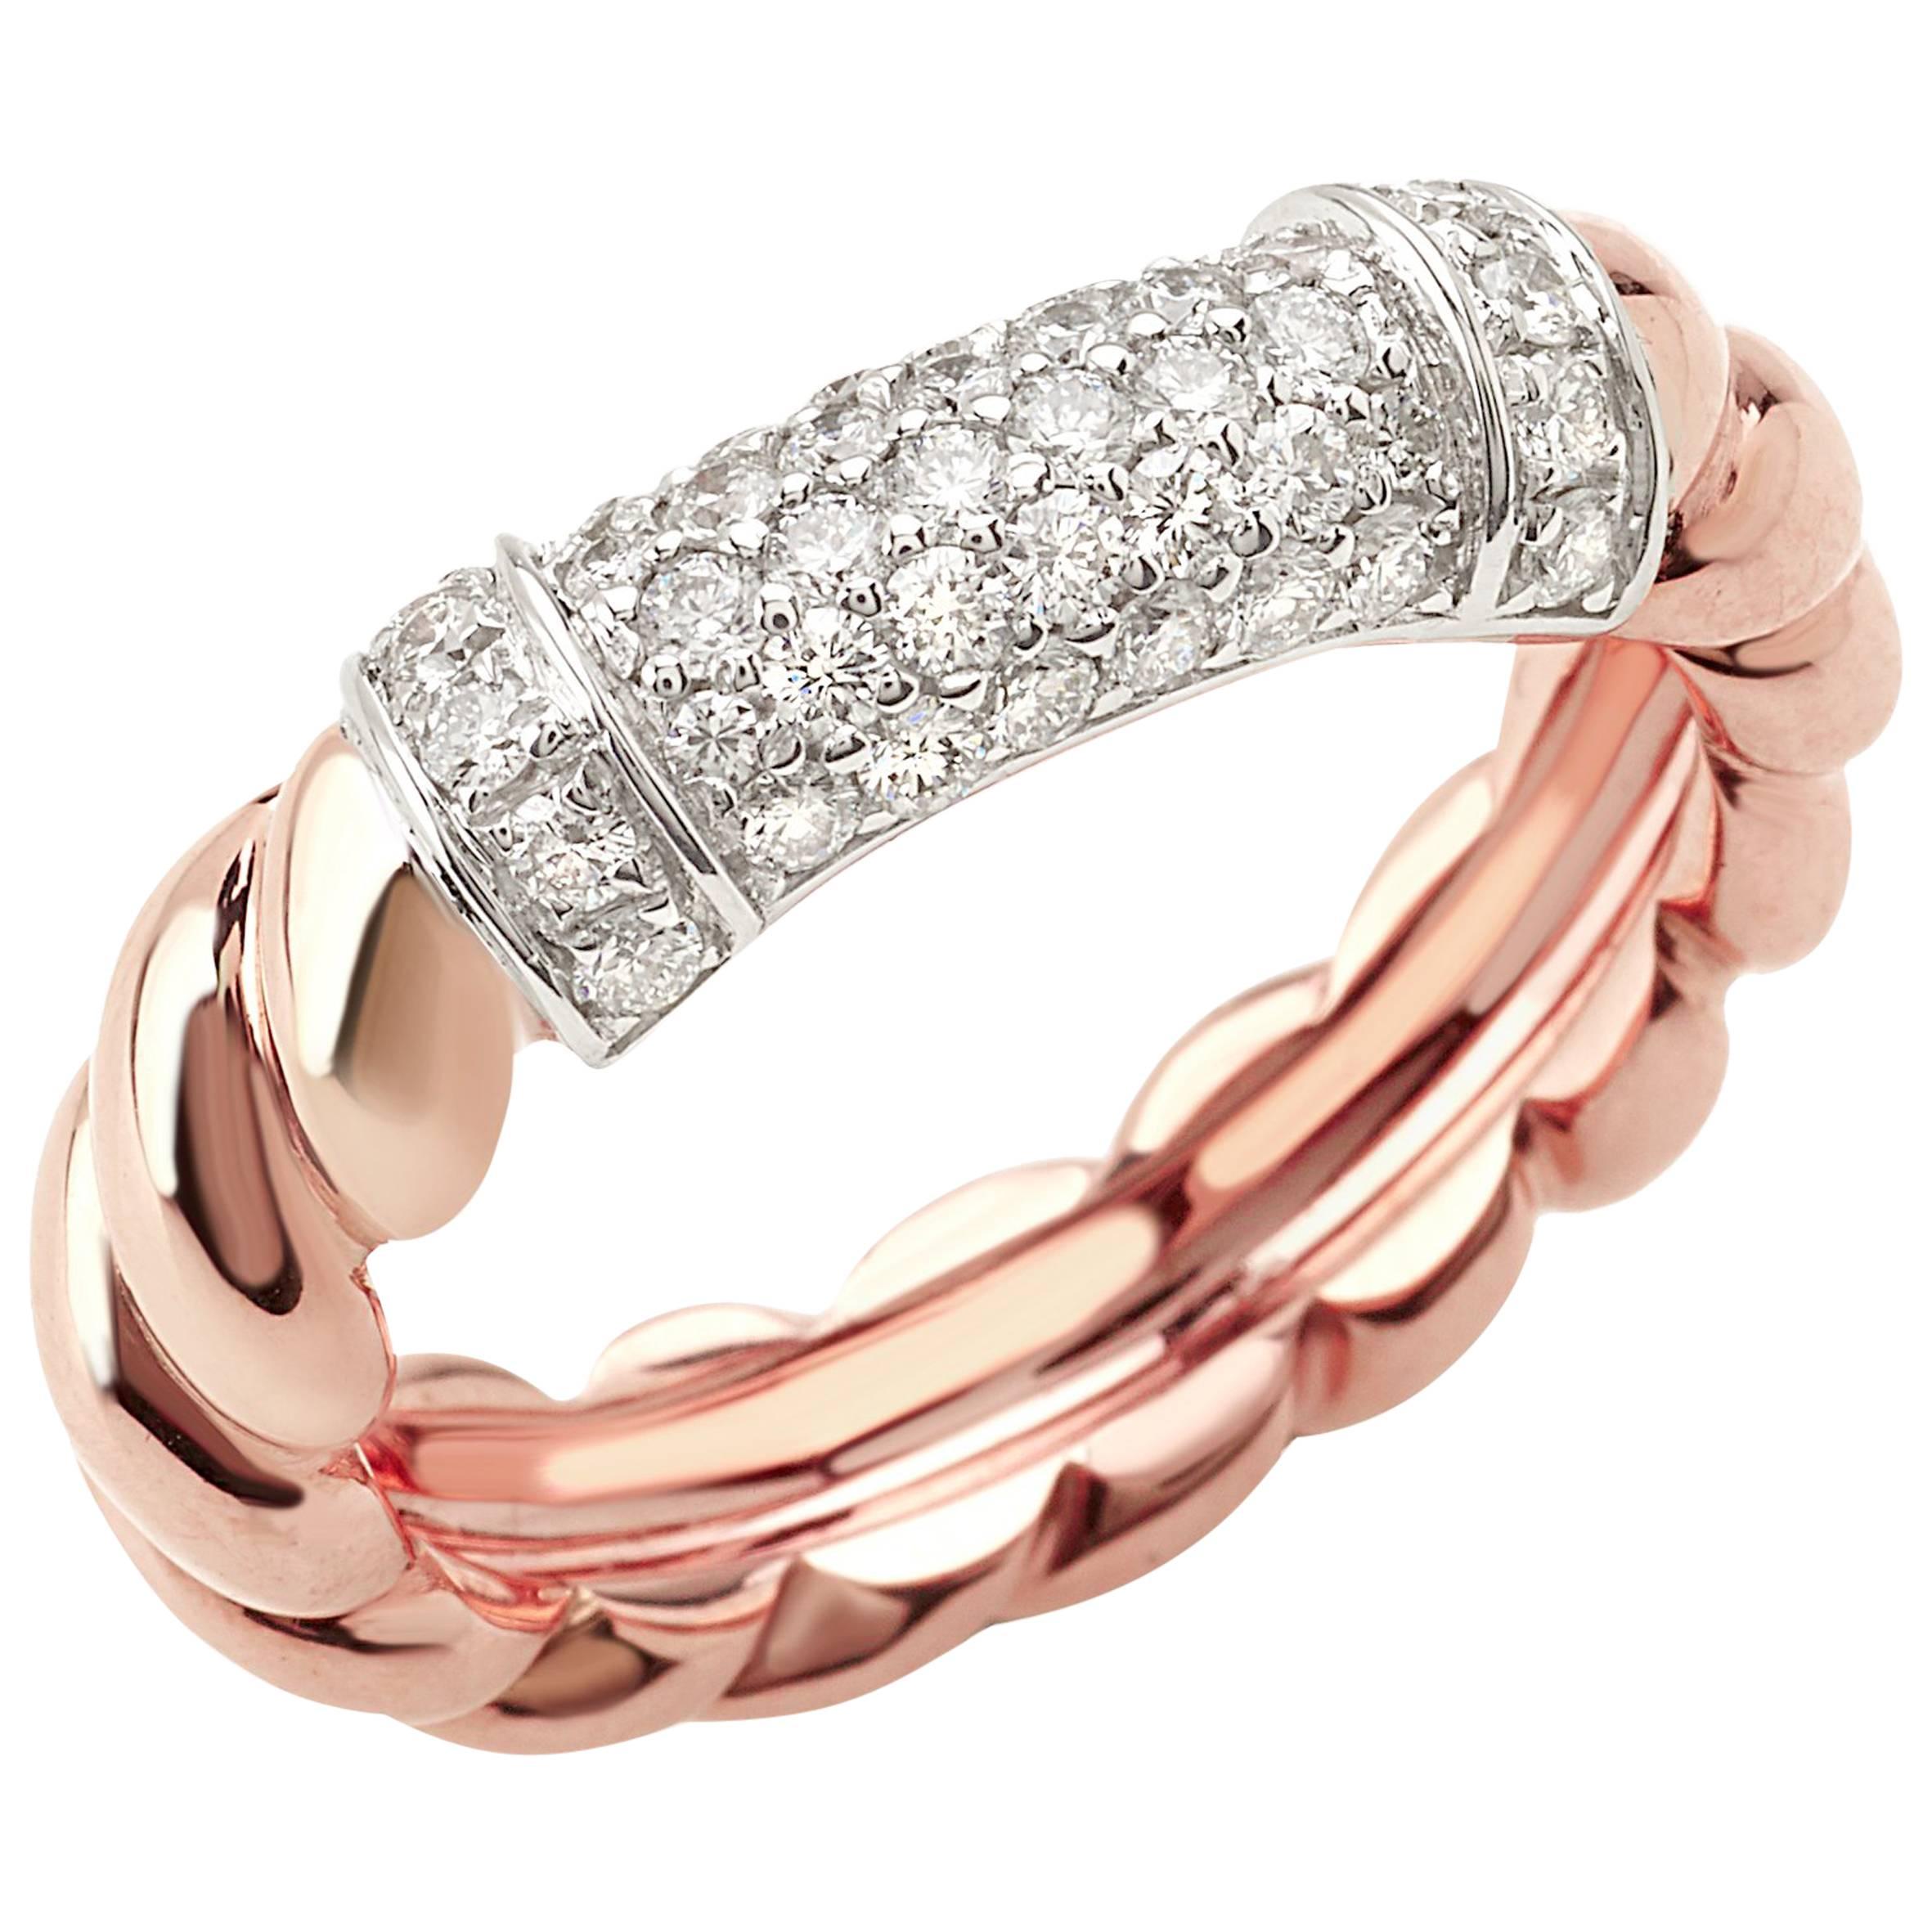 Ring from the Collection "Rope" 18 Karat Rose Gold and Diamonds